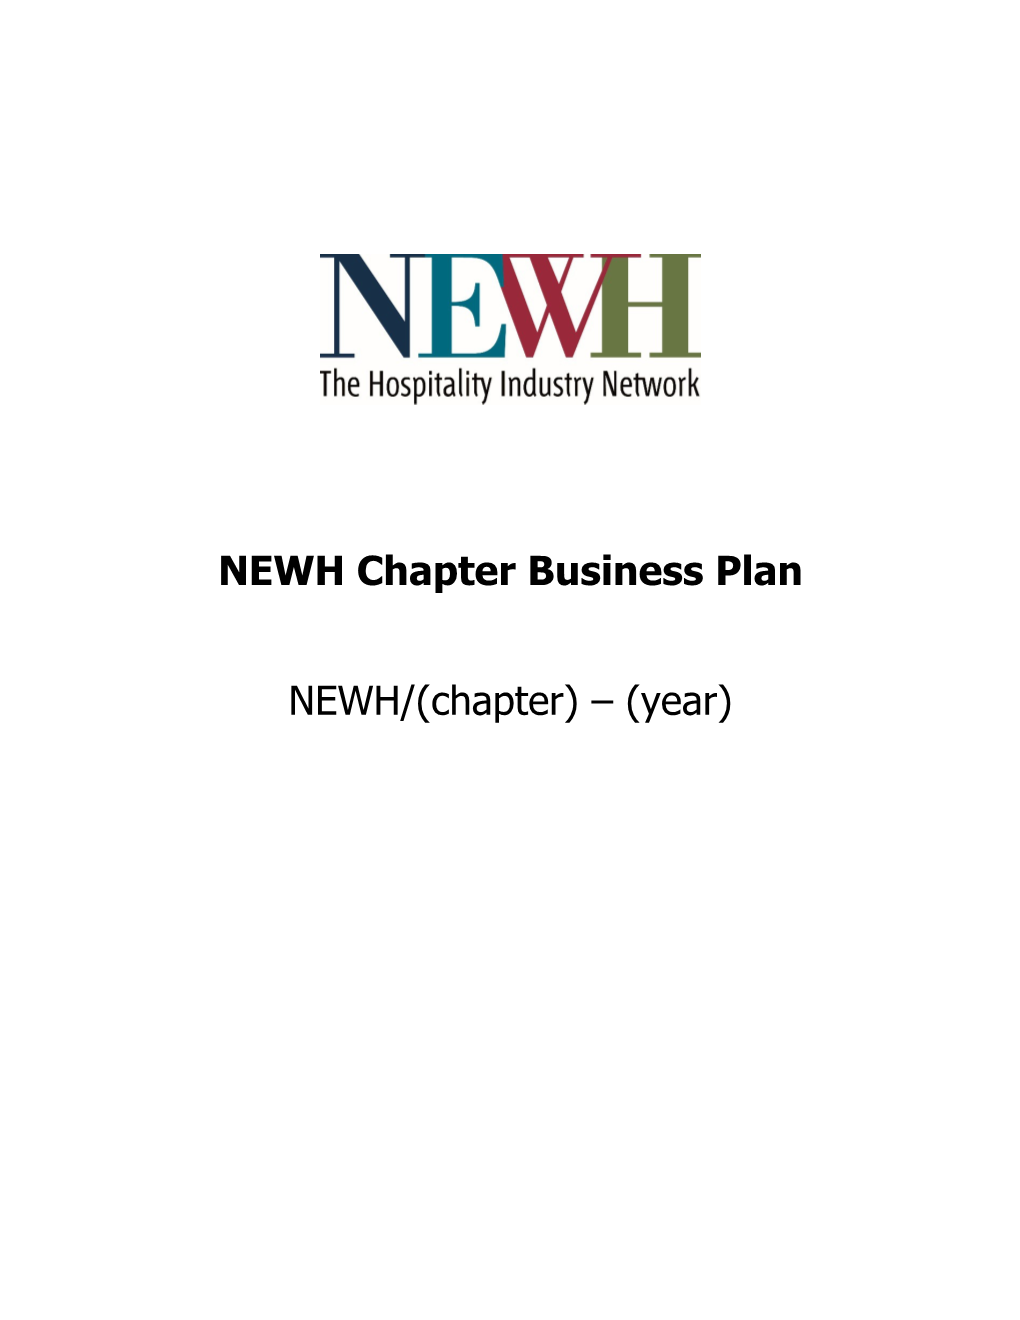 NEWH Chapter Business Plan